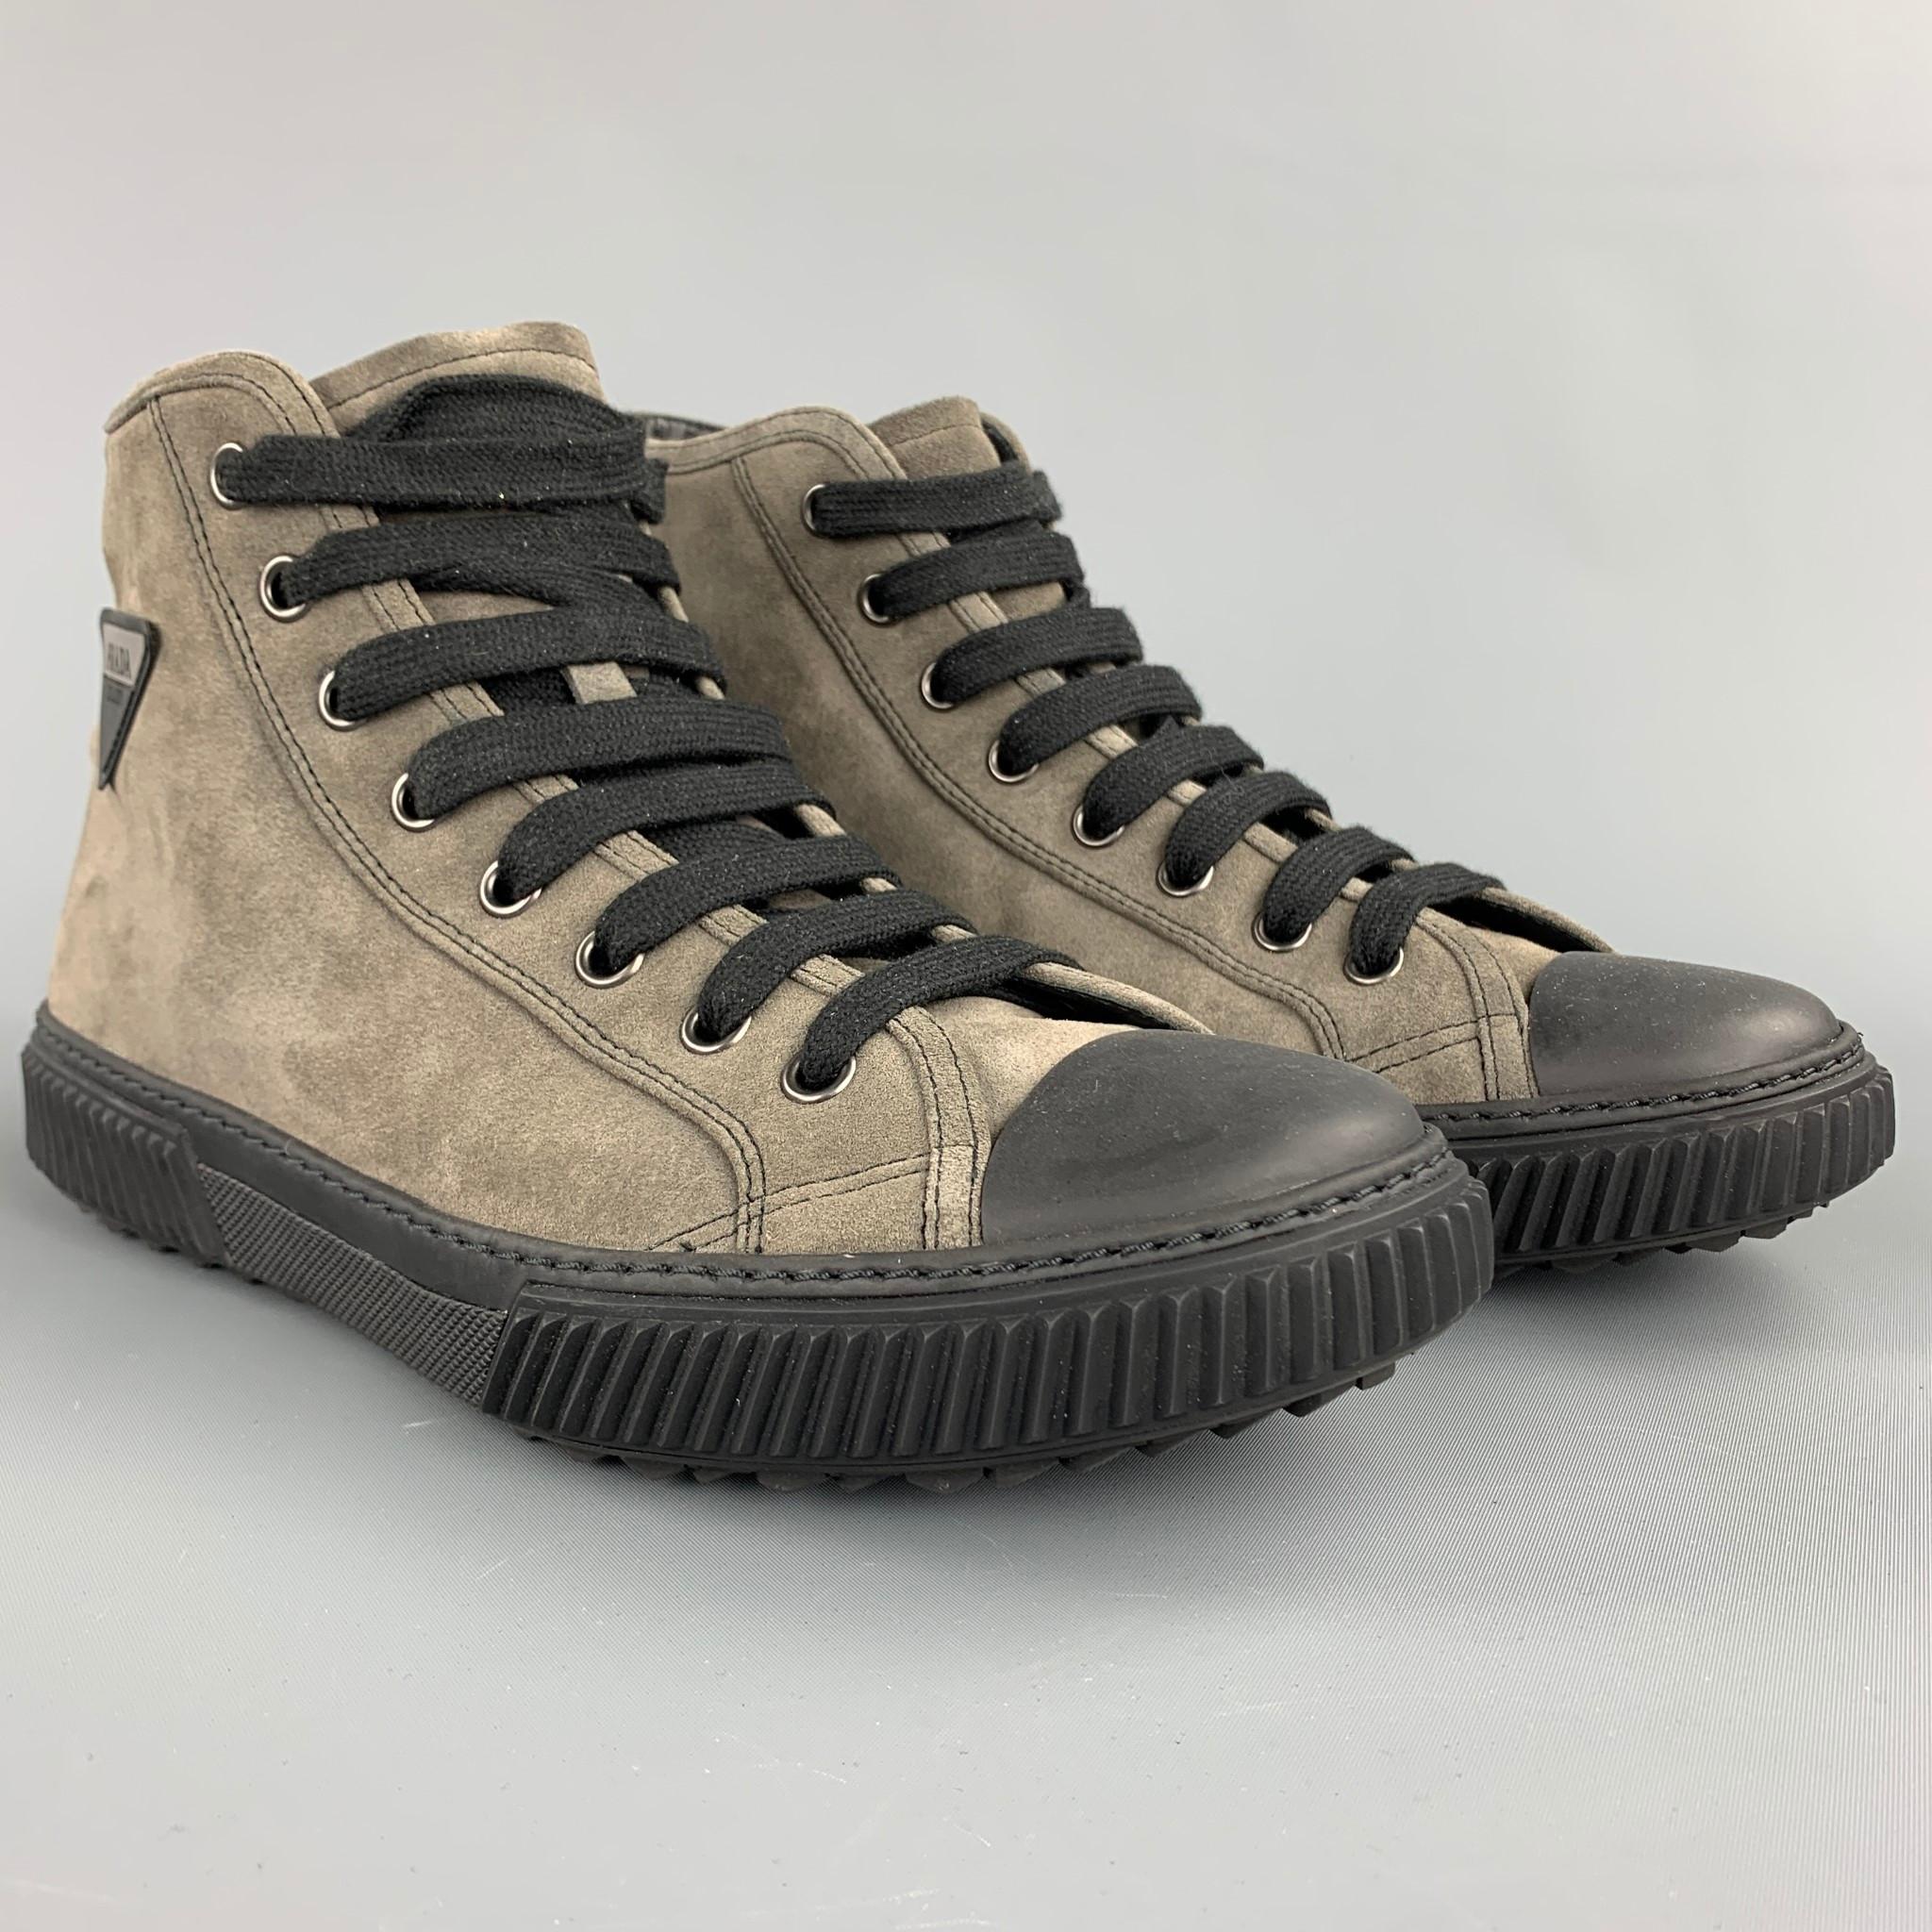 PRADA sneakers comes in a gray suede with a black trim featuring a high top style, side logo, rubber sole, and a lace up closure. Comes with box.

Very Good Pre-Owned Condition.
Marked: 9
Original Retail Price: $595.00

Measurements:

Length: 12